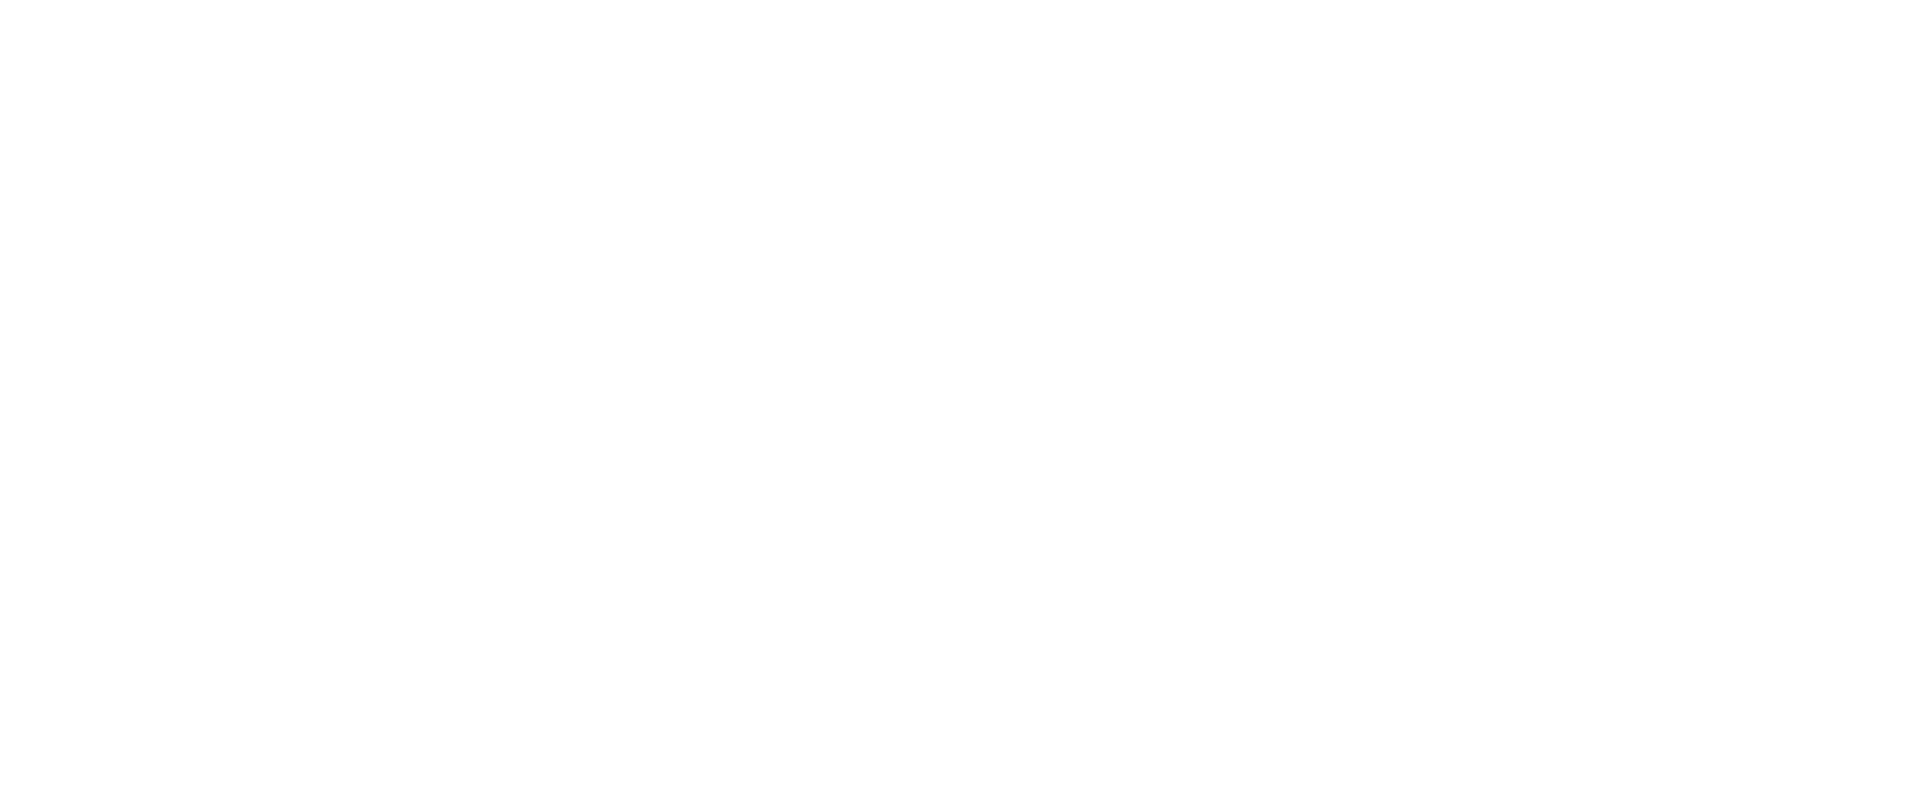 Logo for Duncan's Dream Destinations LLC featuring a stylized uppercase cursive letter D and the slogan 'Your Journey, My Priority'